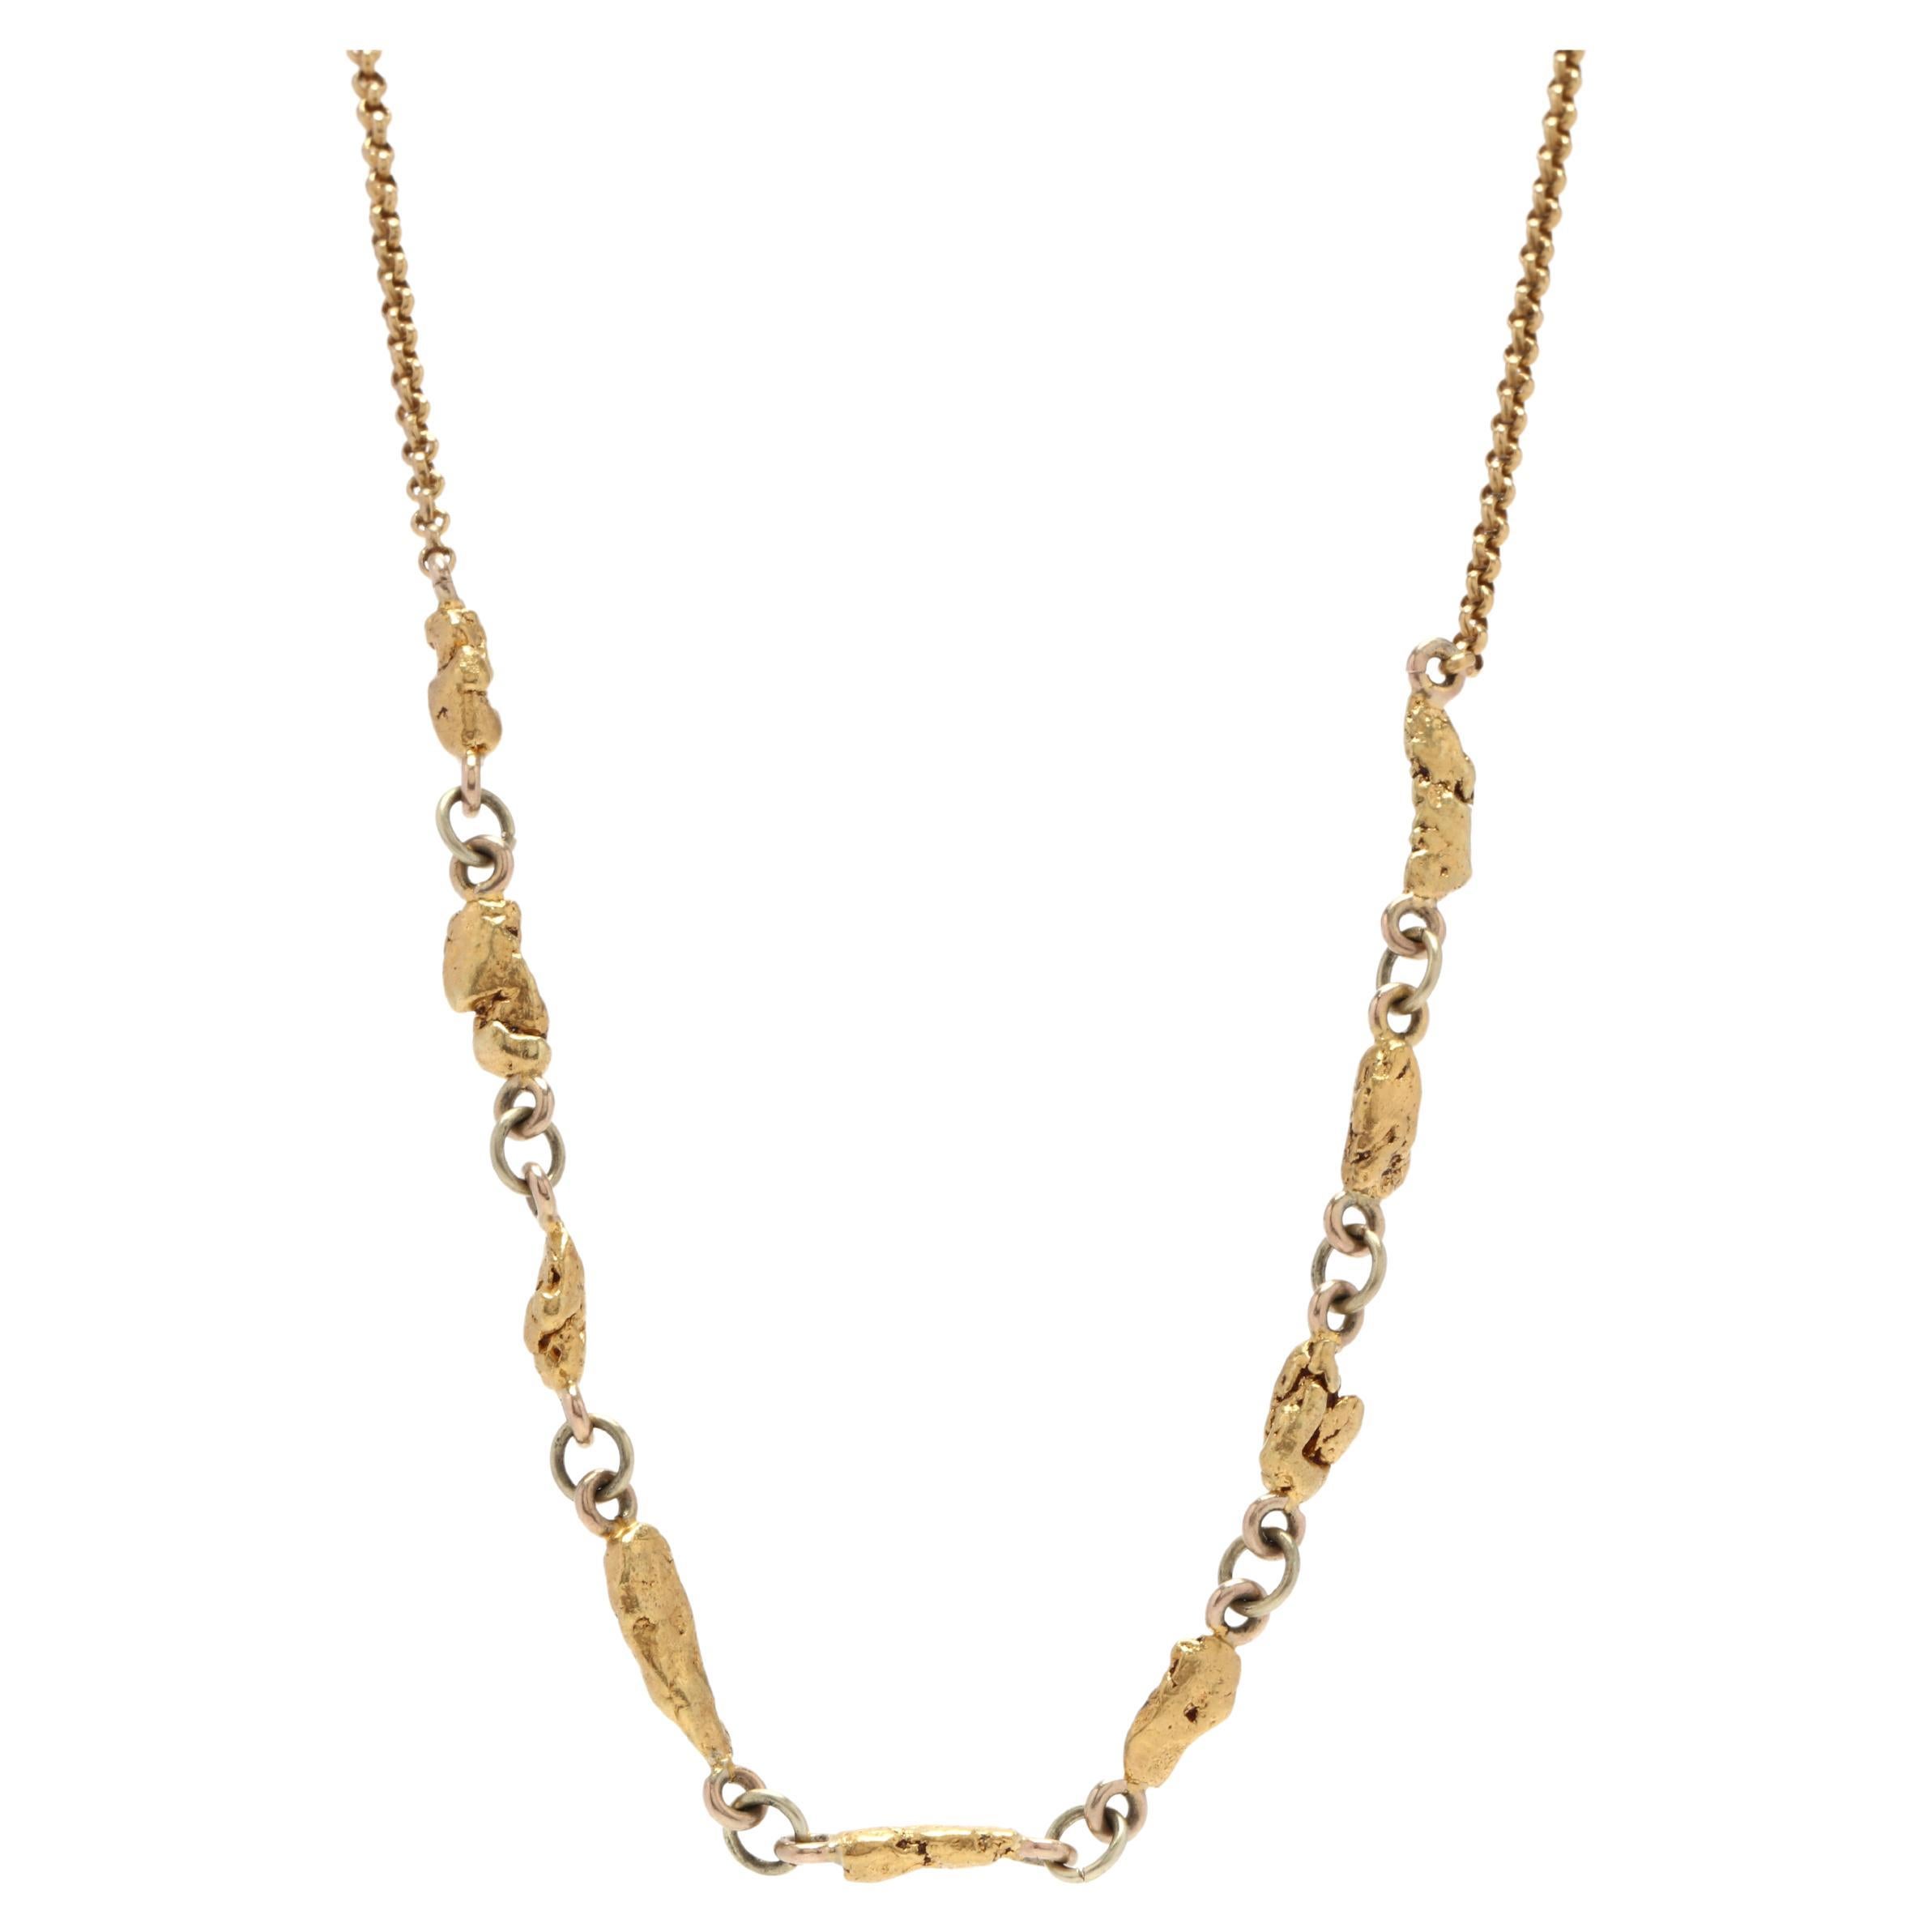 WHOLESALE CLOSEOUT LOTS CLEARANCE GOLD GP 18" GOLD NUGGET CURB NECKLACE W27 